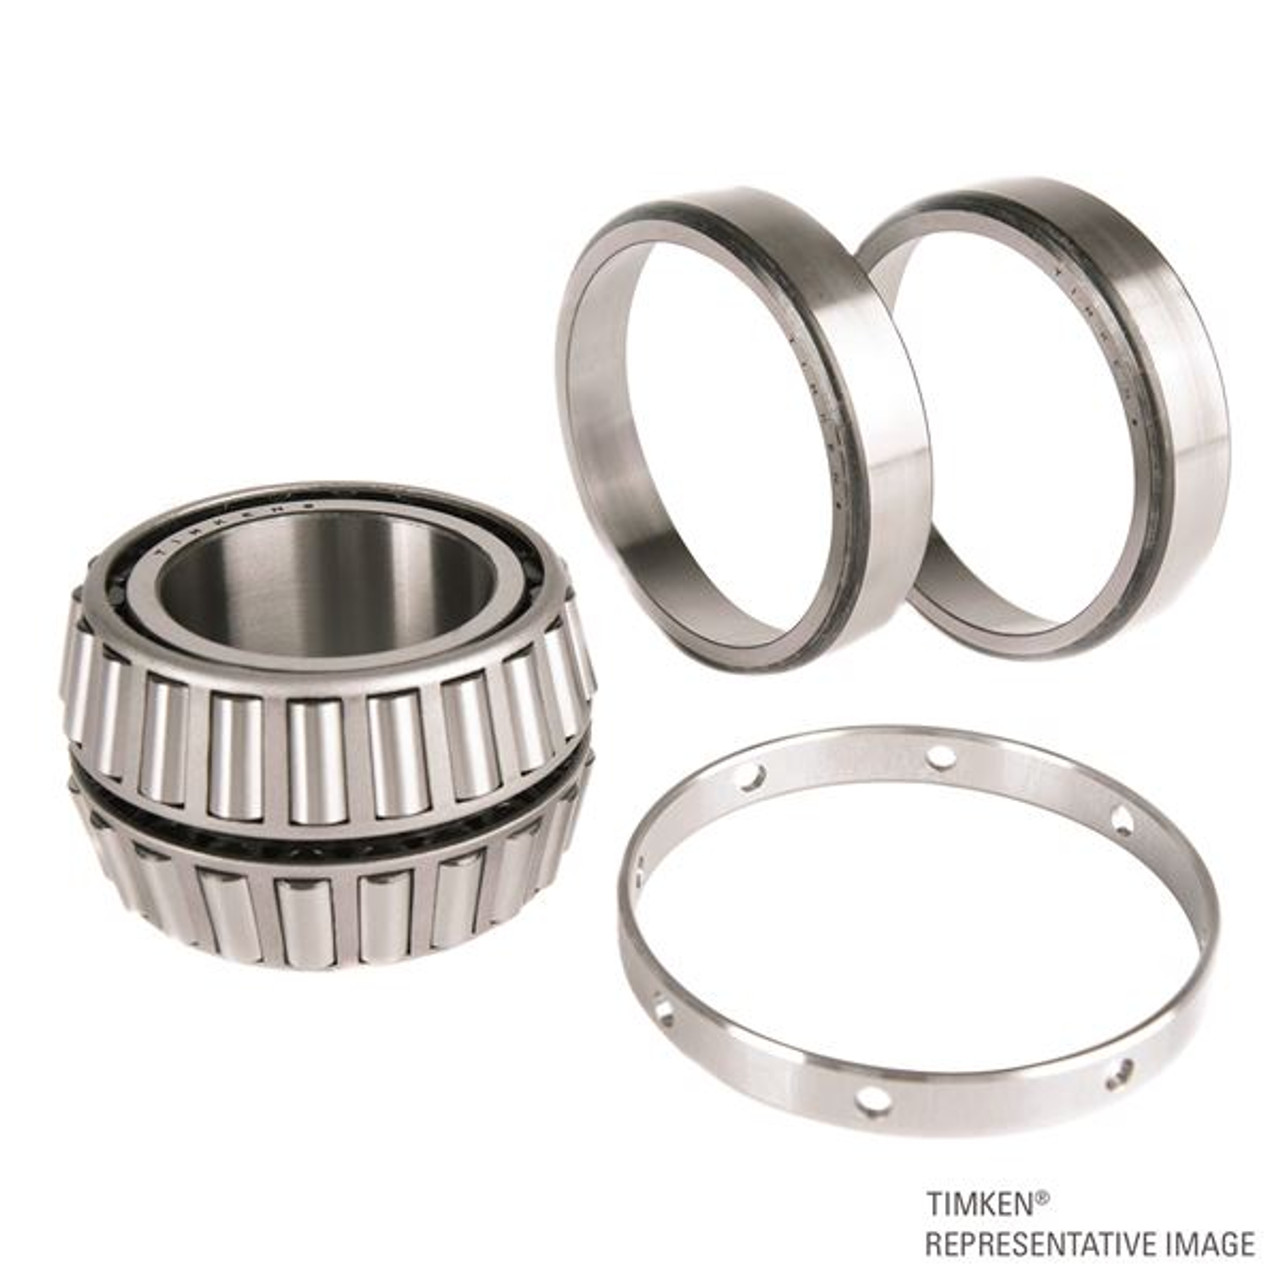 Timken® TDI Single Double Cone Assembly  581D-902A1